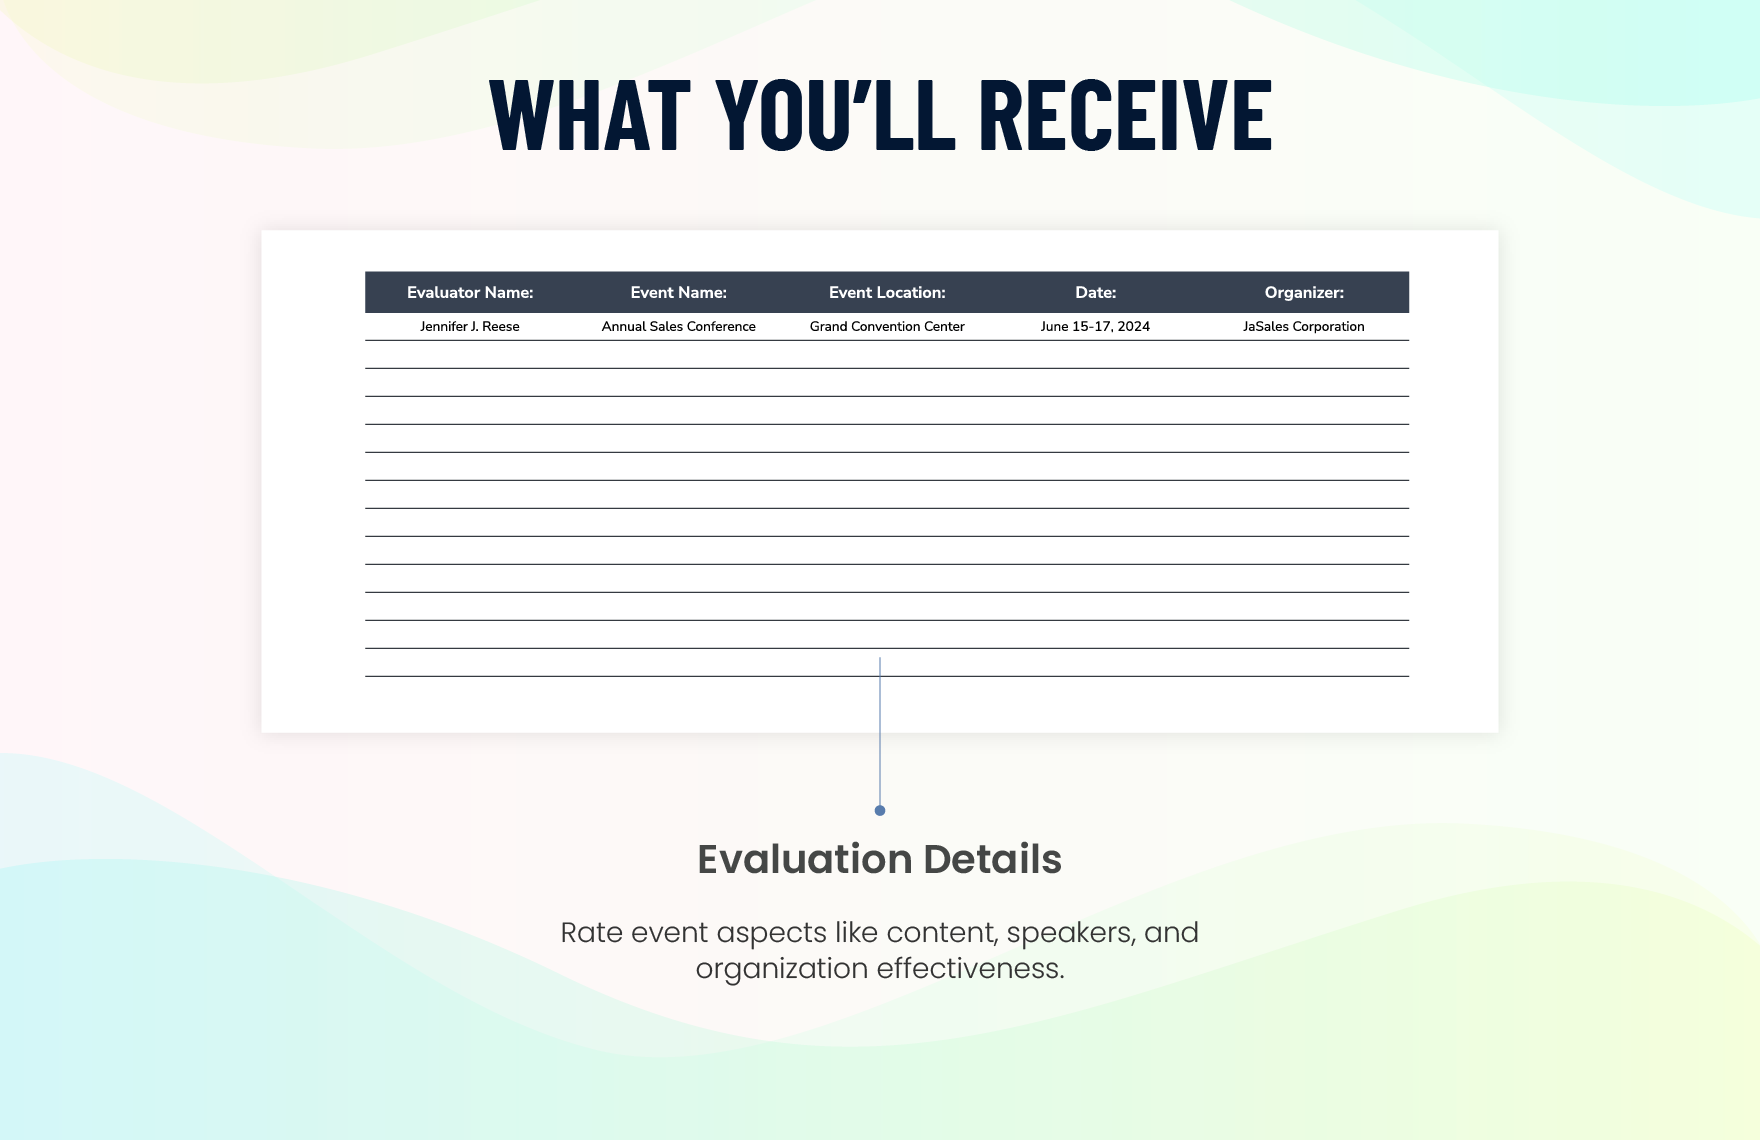 Sales Event Feedback Form Template